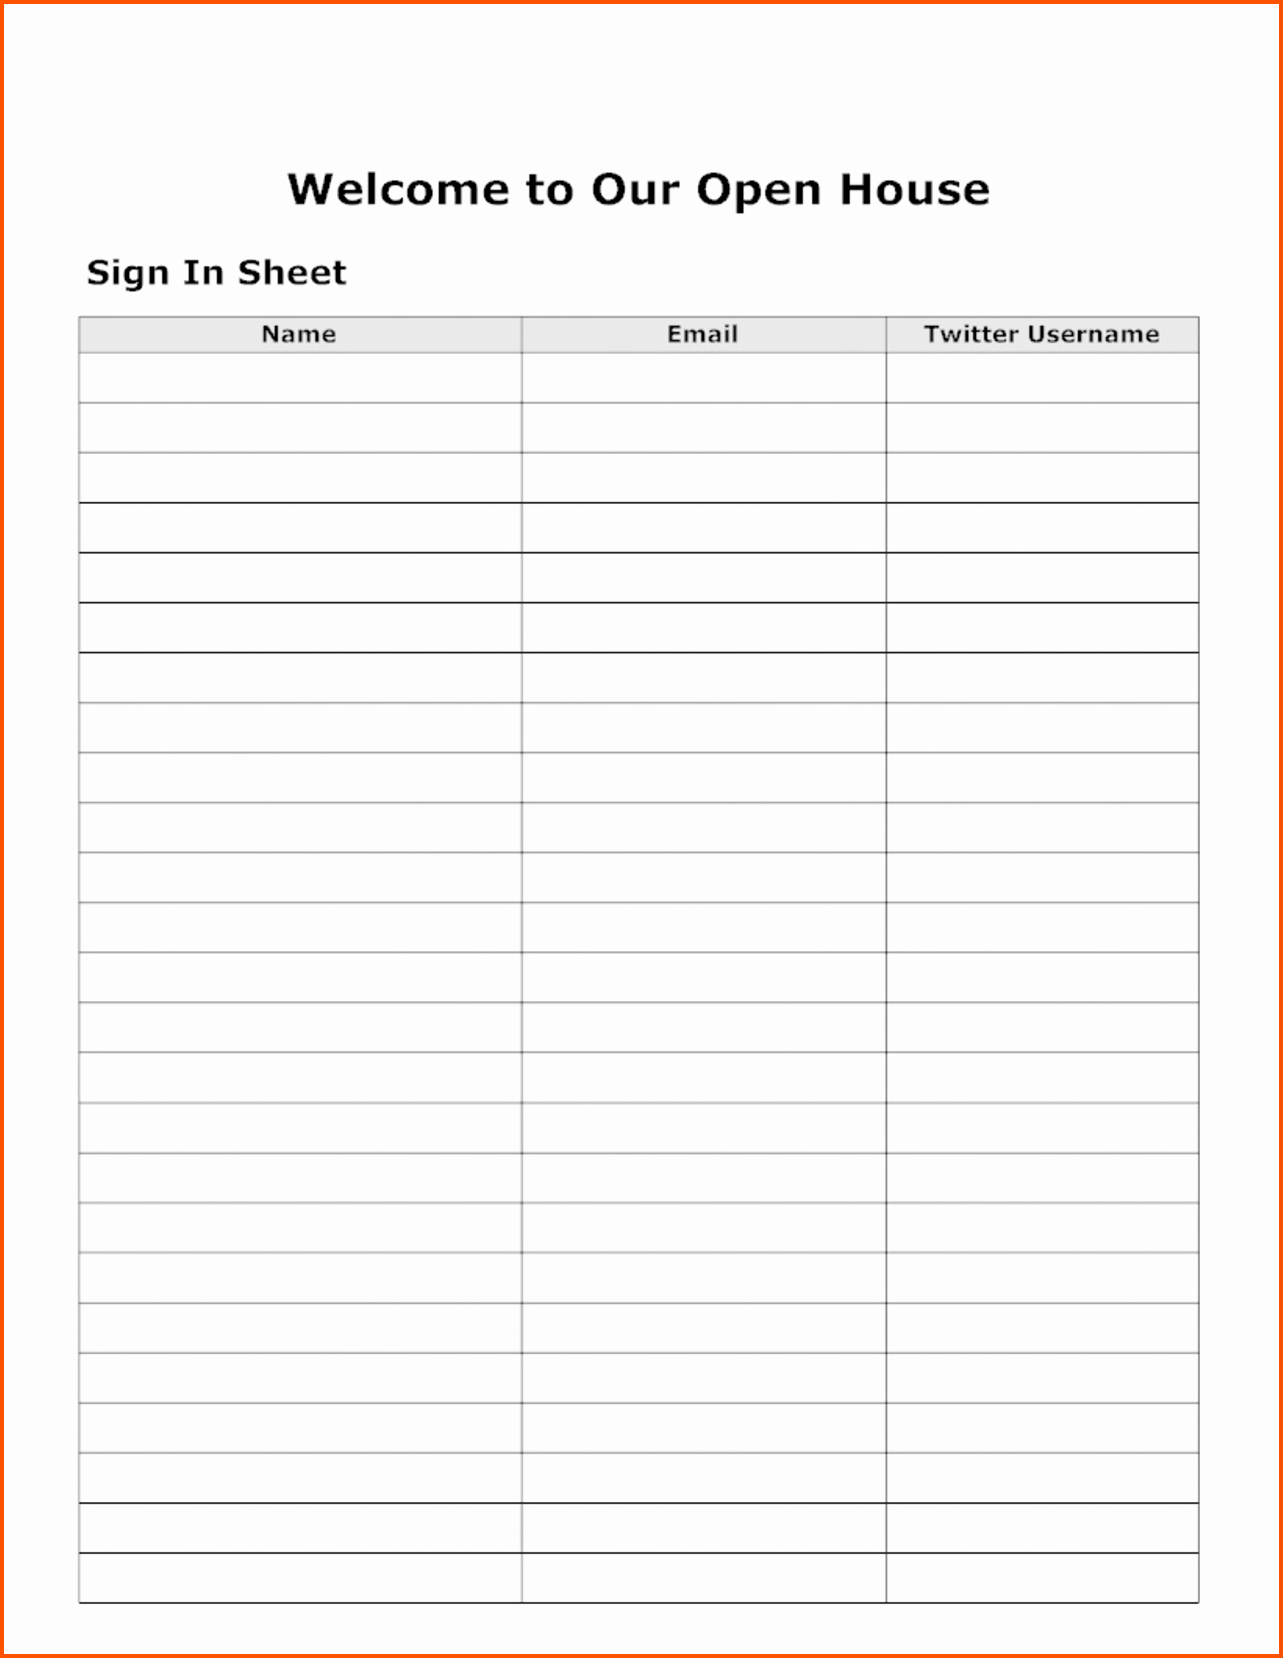 Sign In Sheet Template Free New Free Printable Sign In Sheet Template